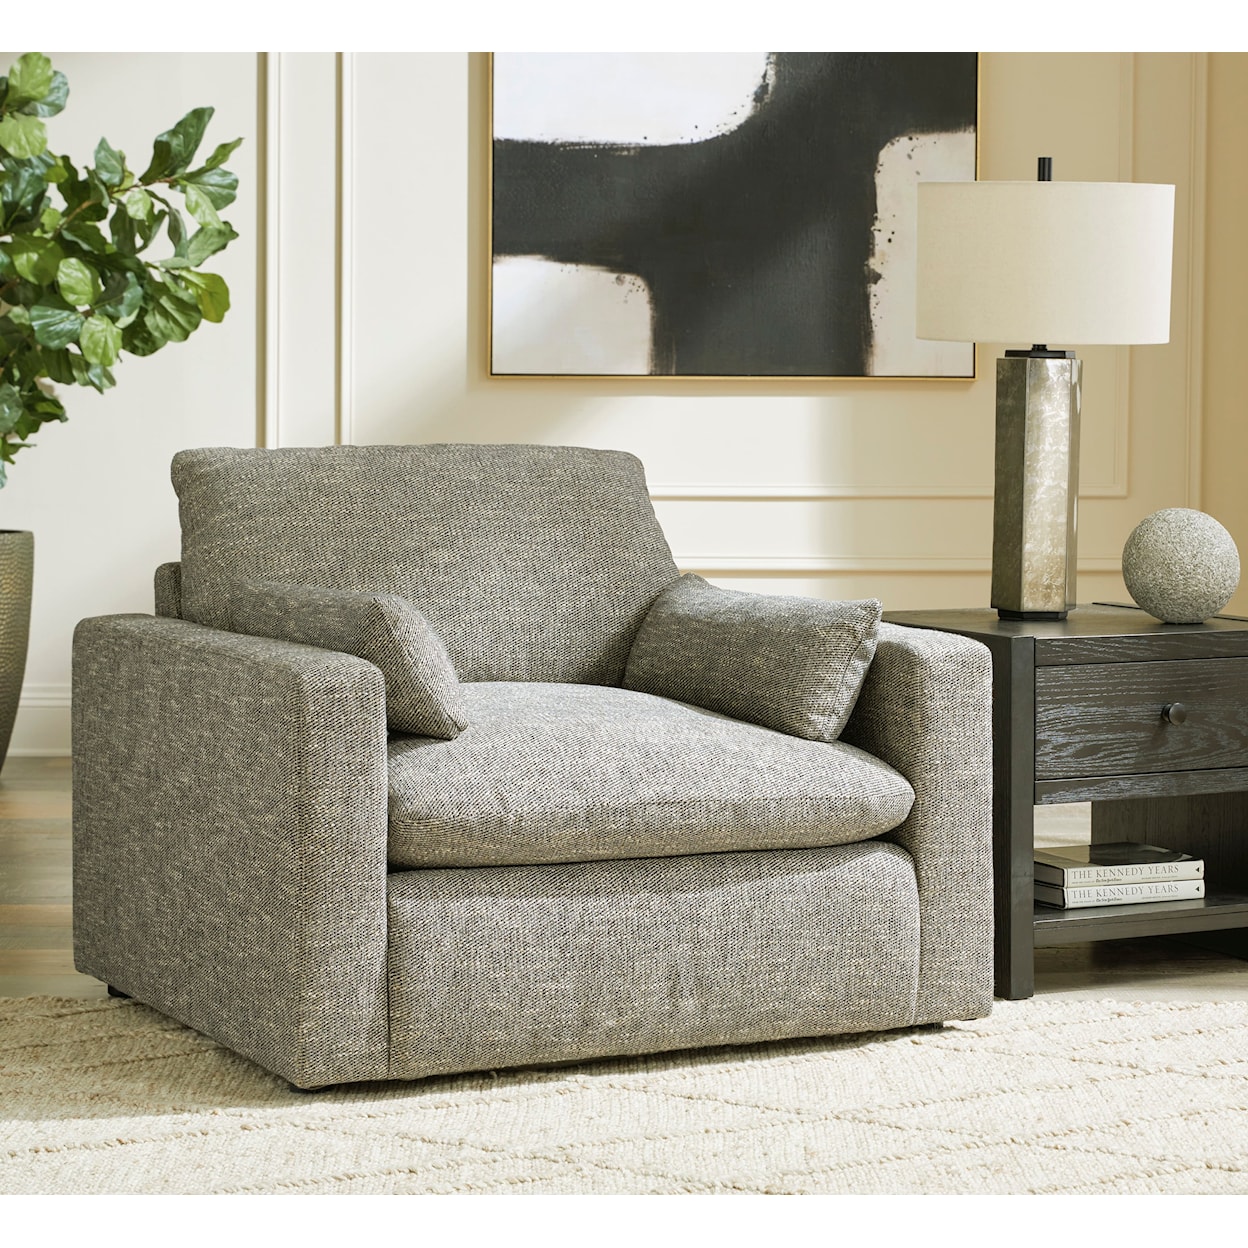 Benchcraft Dramatic Oversized Chair and Ottoman